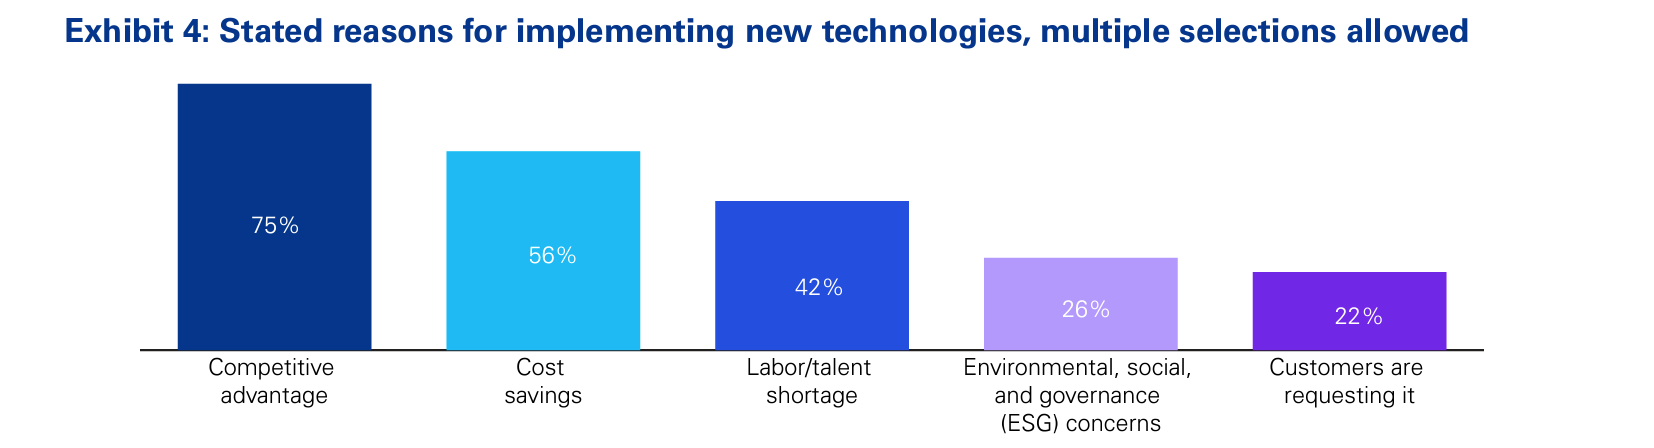 Stated reasons for implementing new technologies data graph